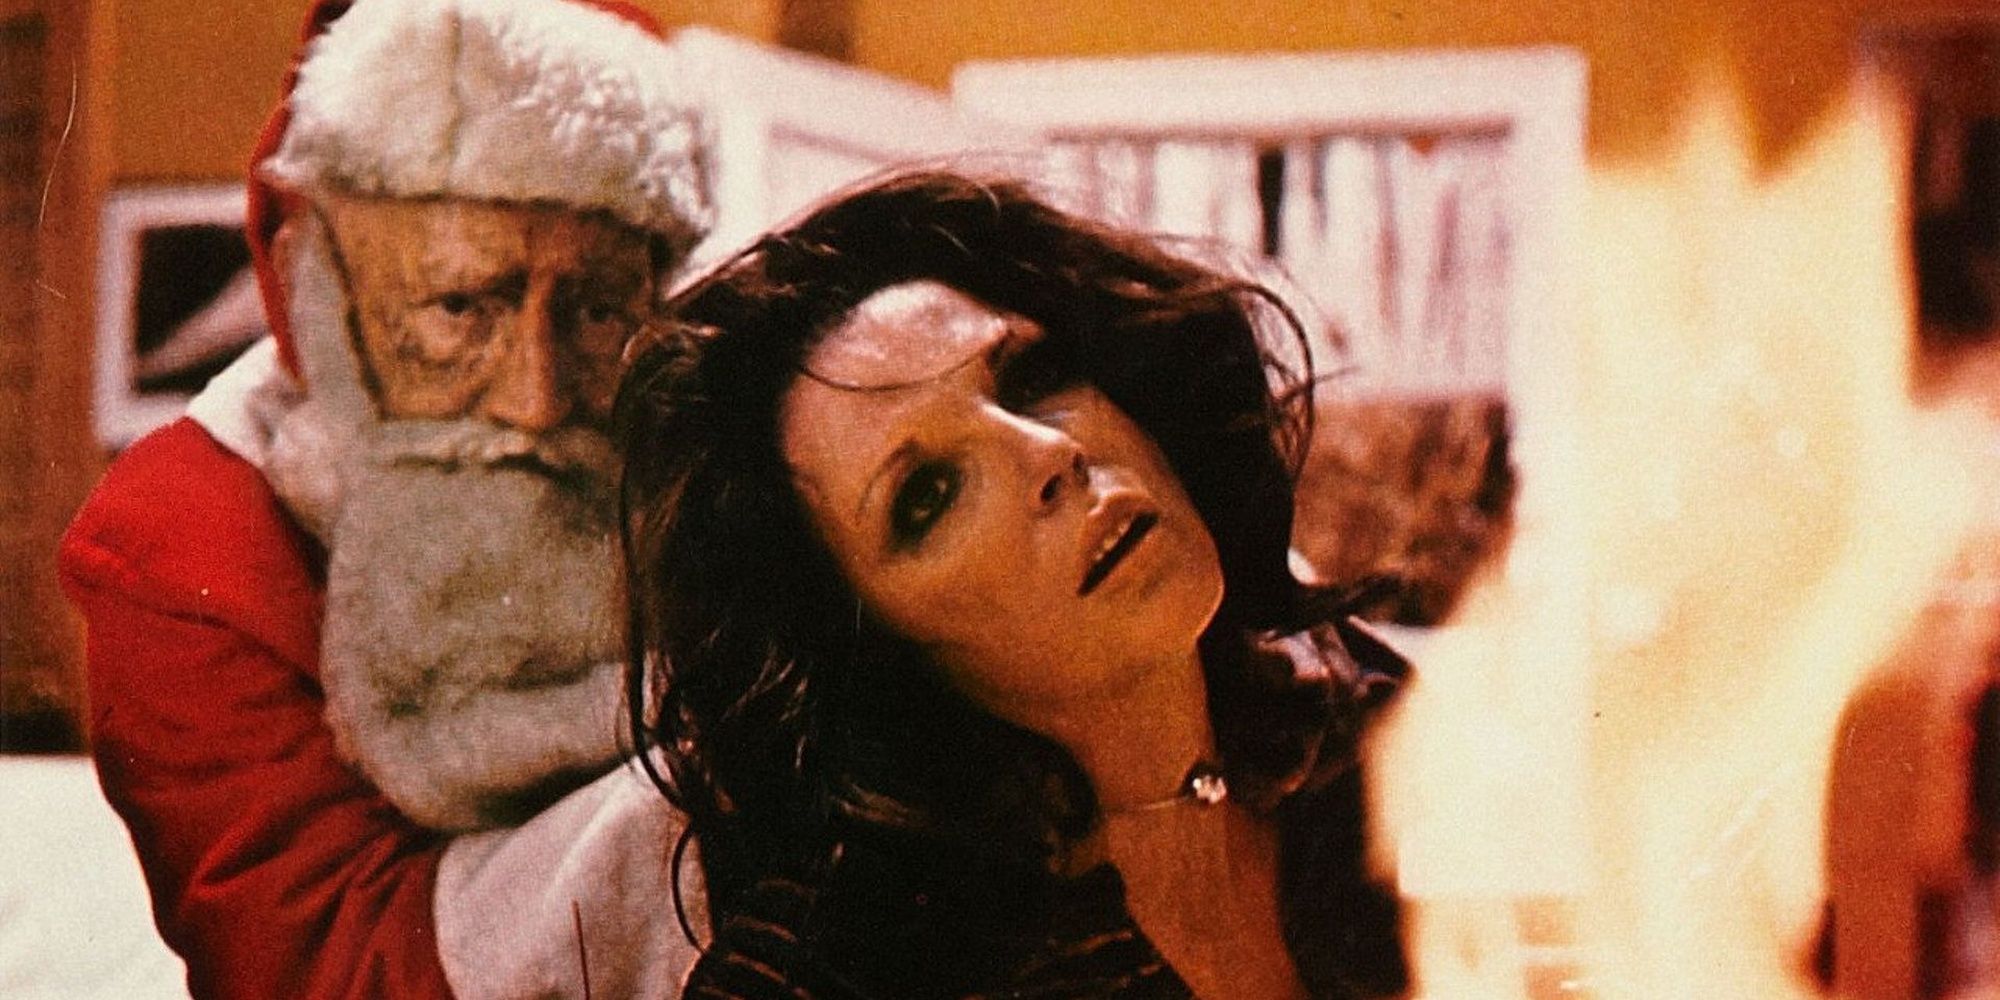 A woman being murdered by Santa Claus in Tales from the Crypt